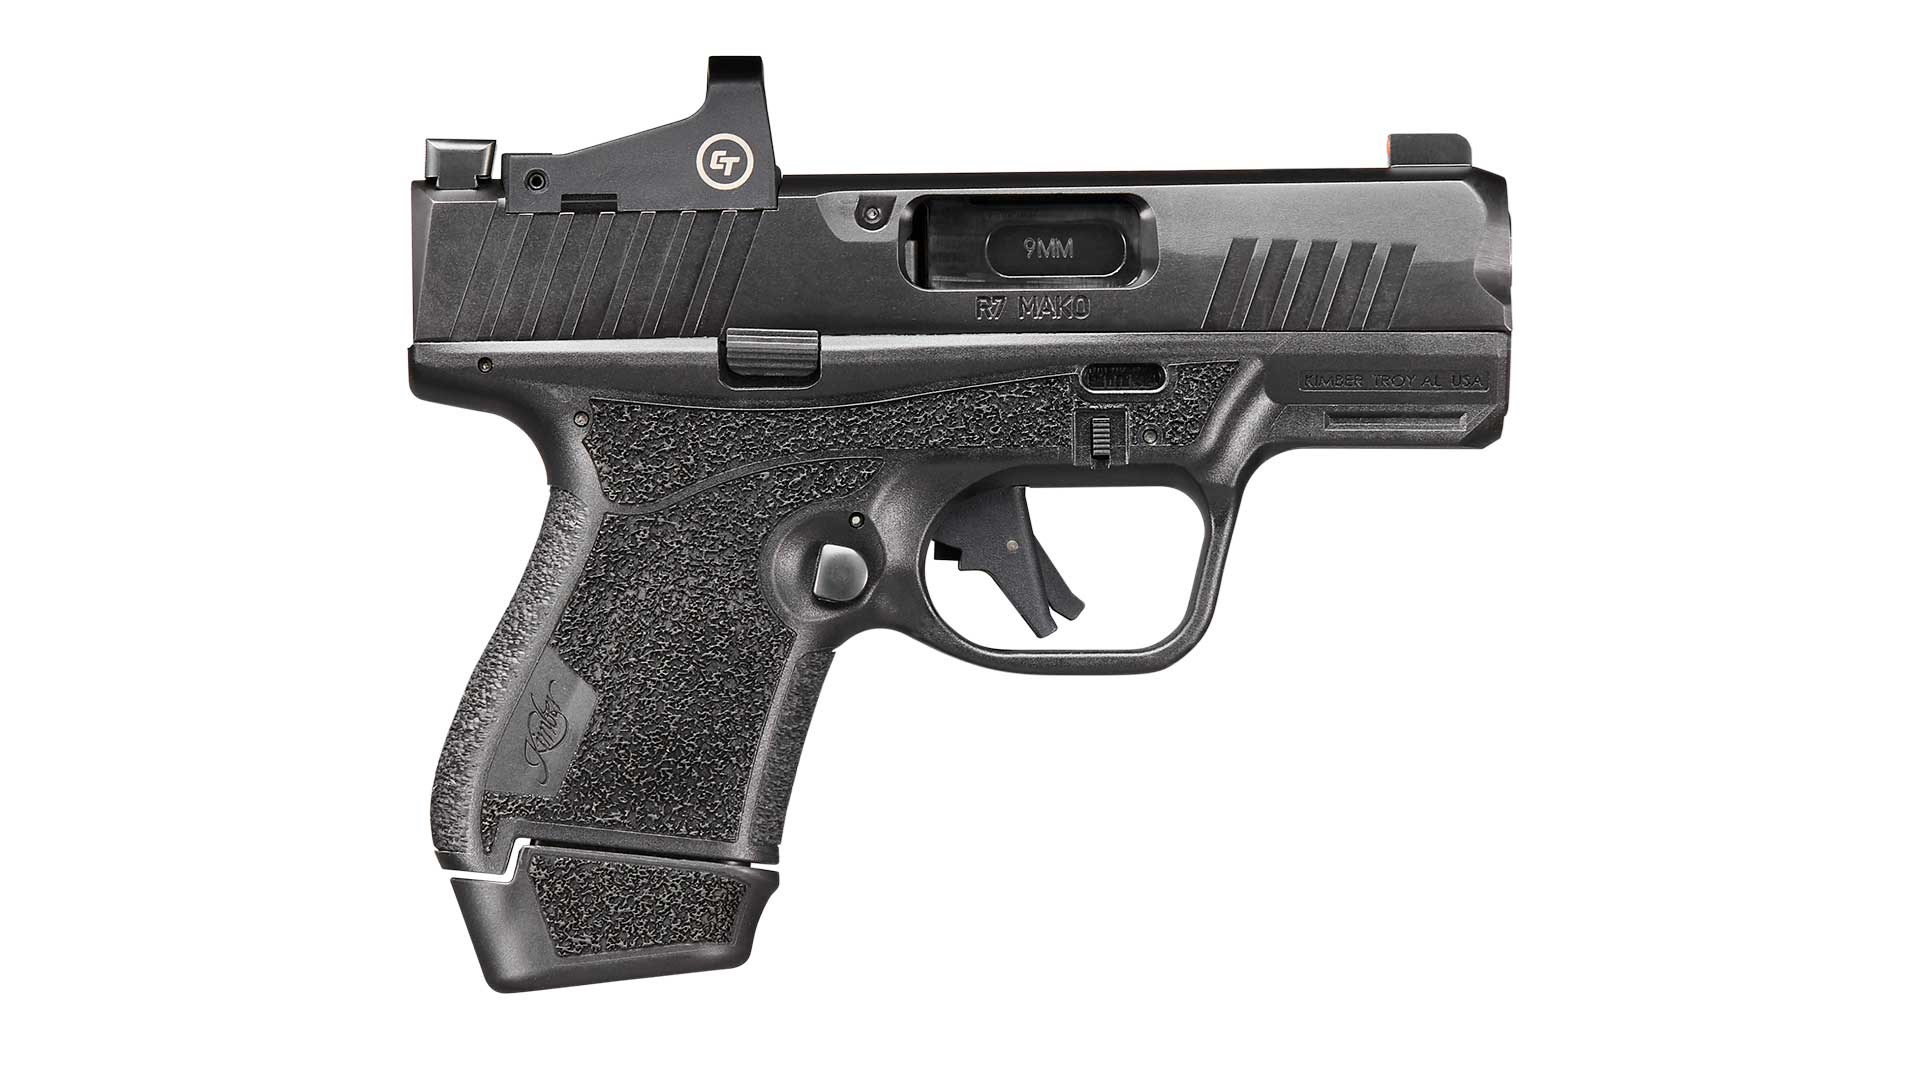 Kimber R7 Mako micro-compact handgun shown with a 13-round extended magazine.